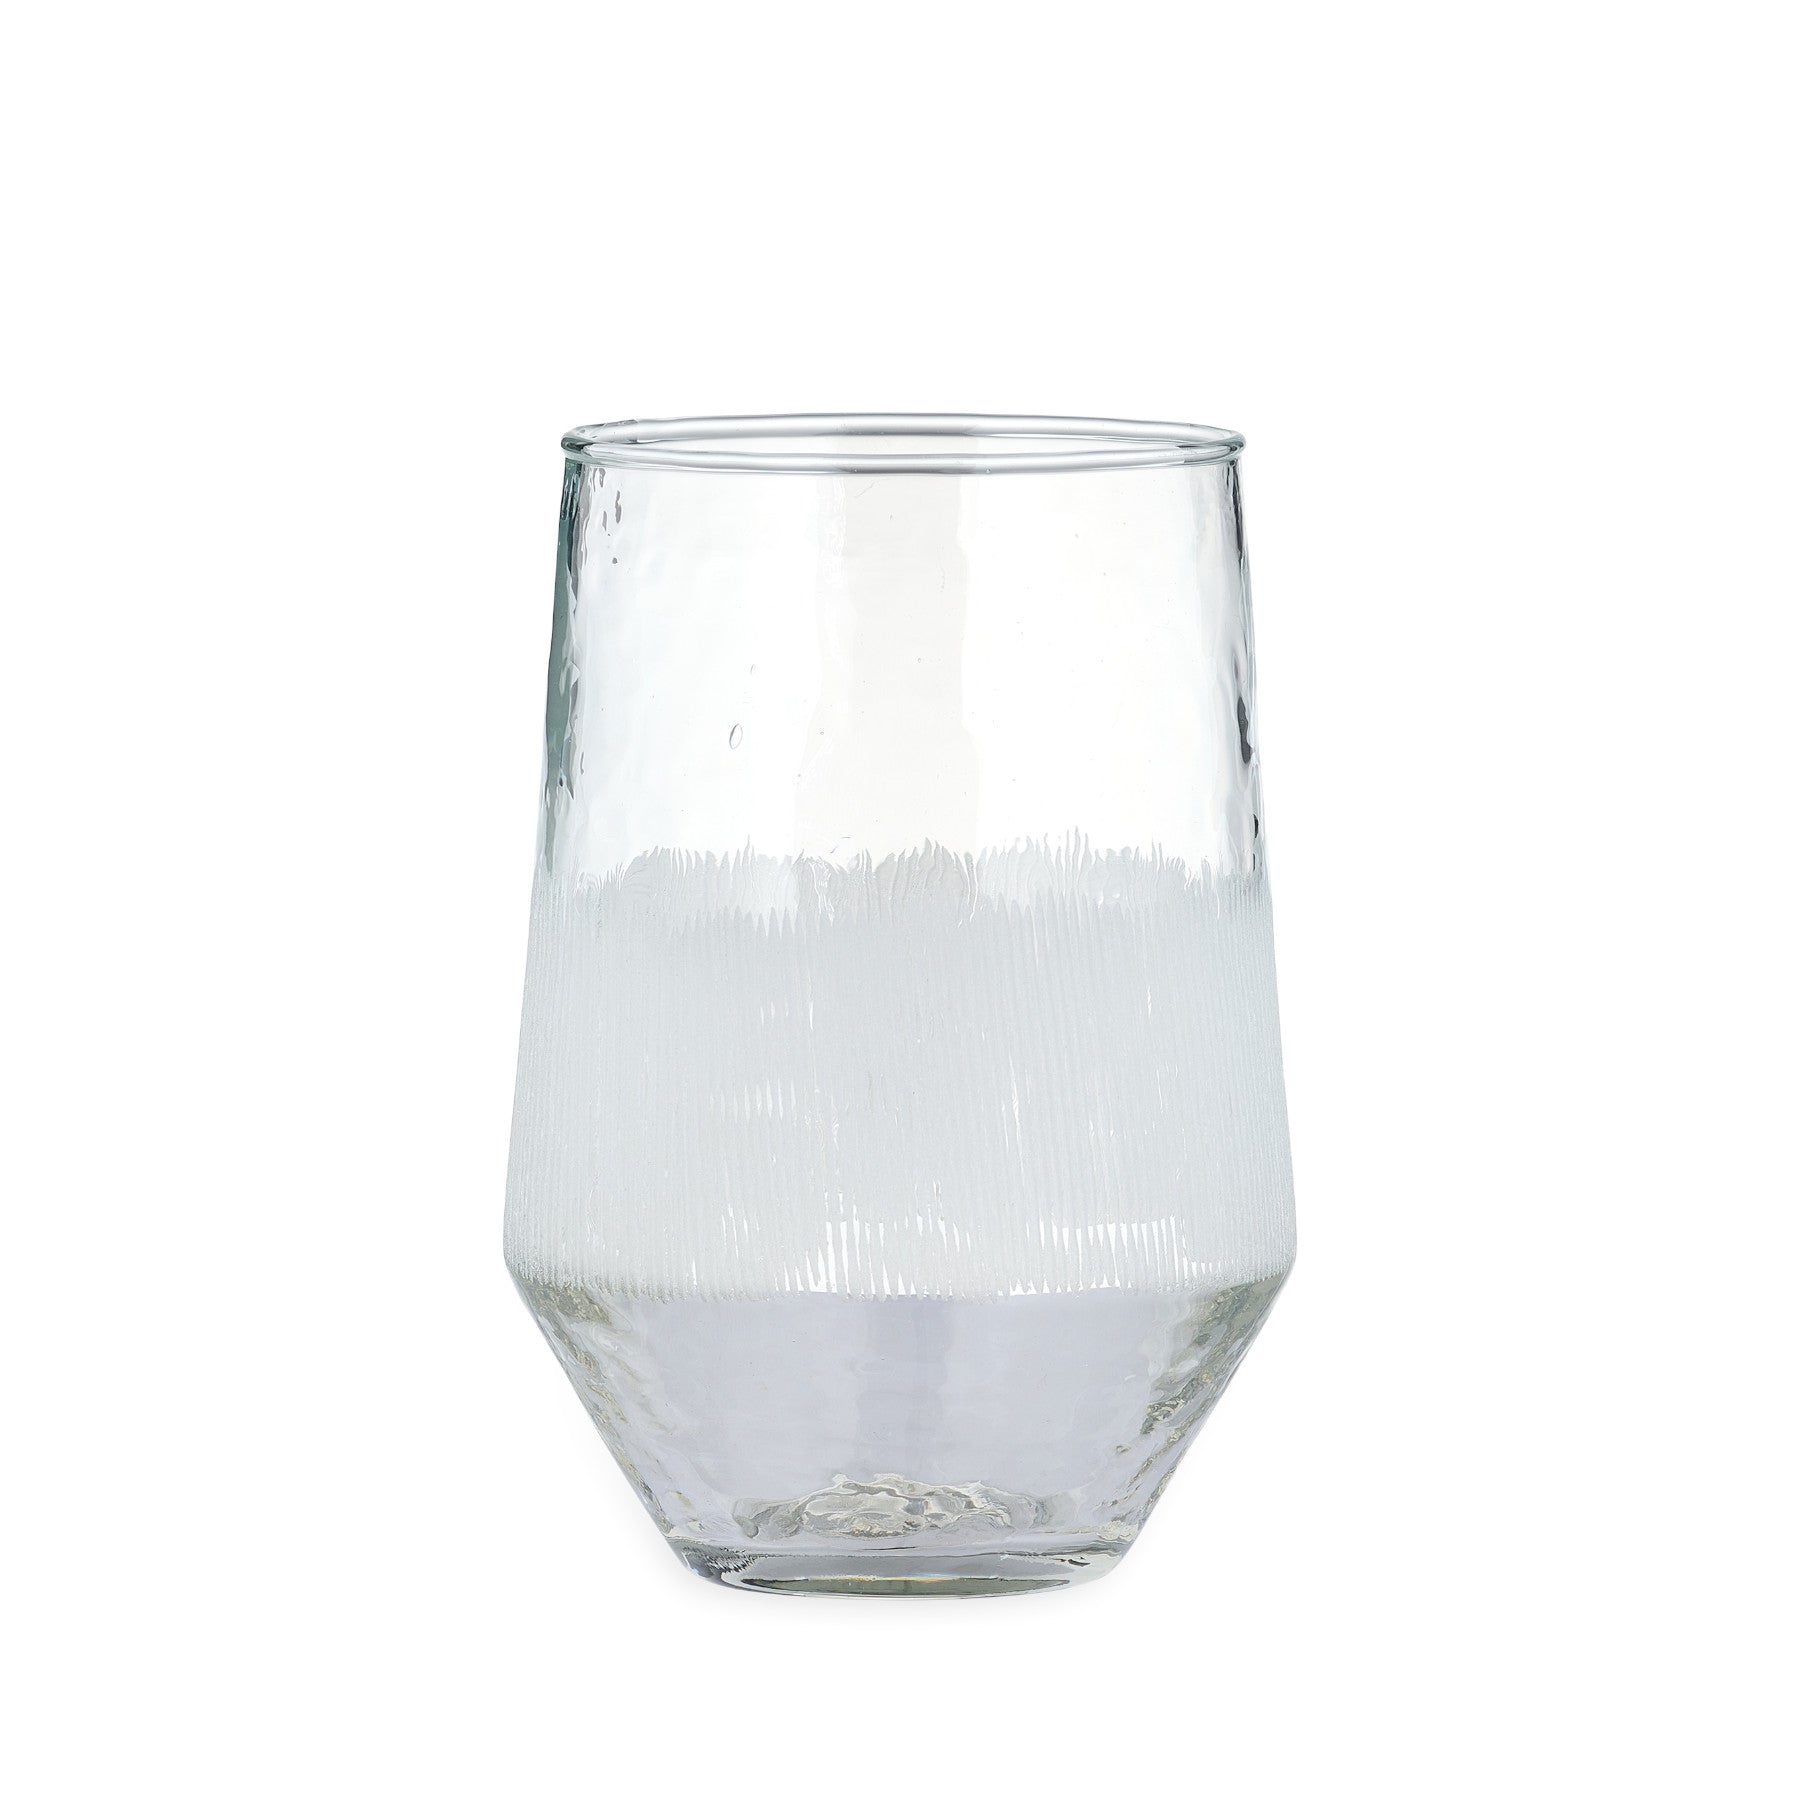 Clear glass half-filled with water on a white background